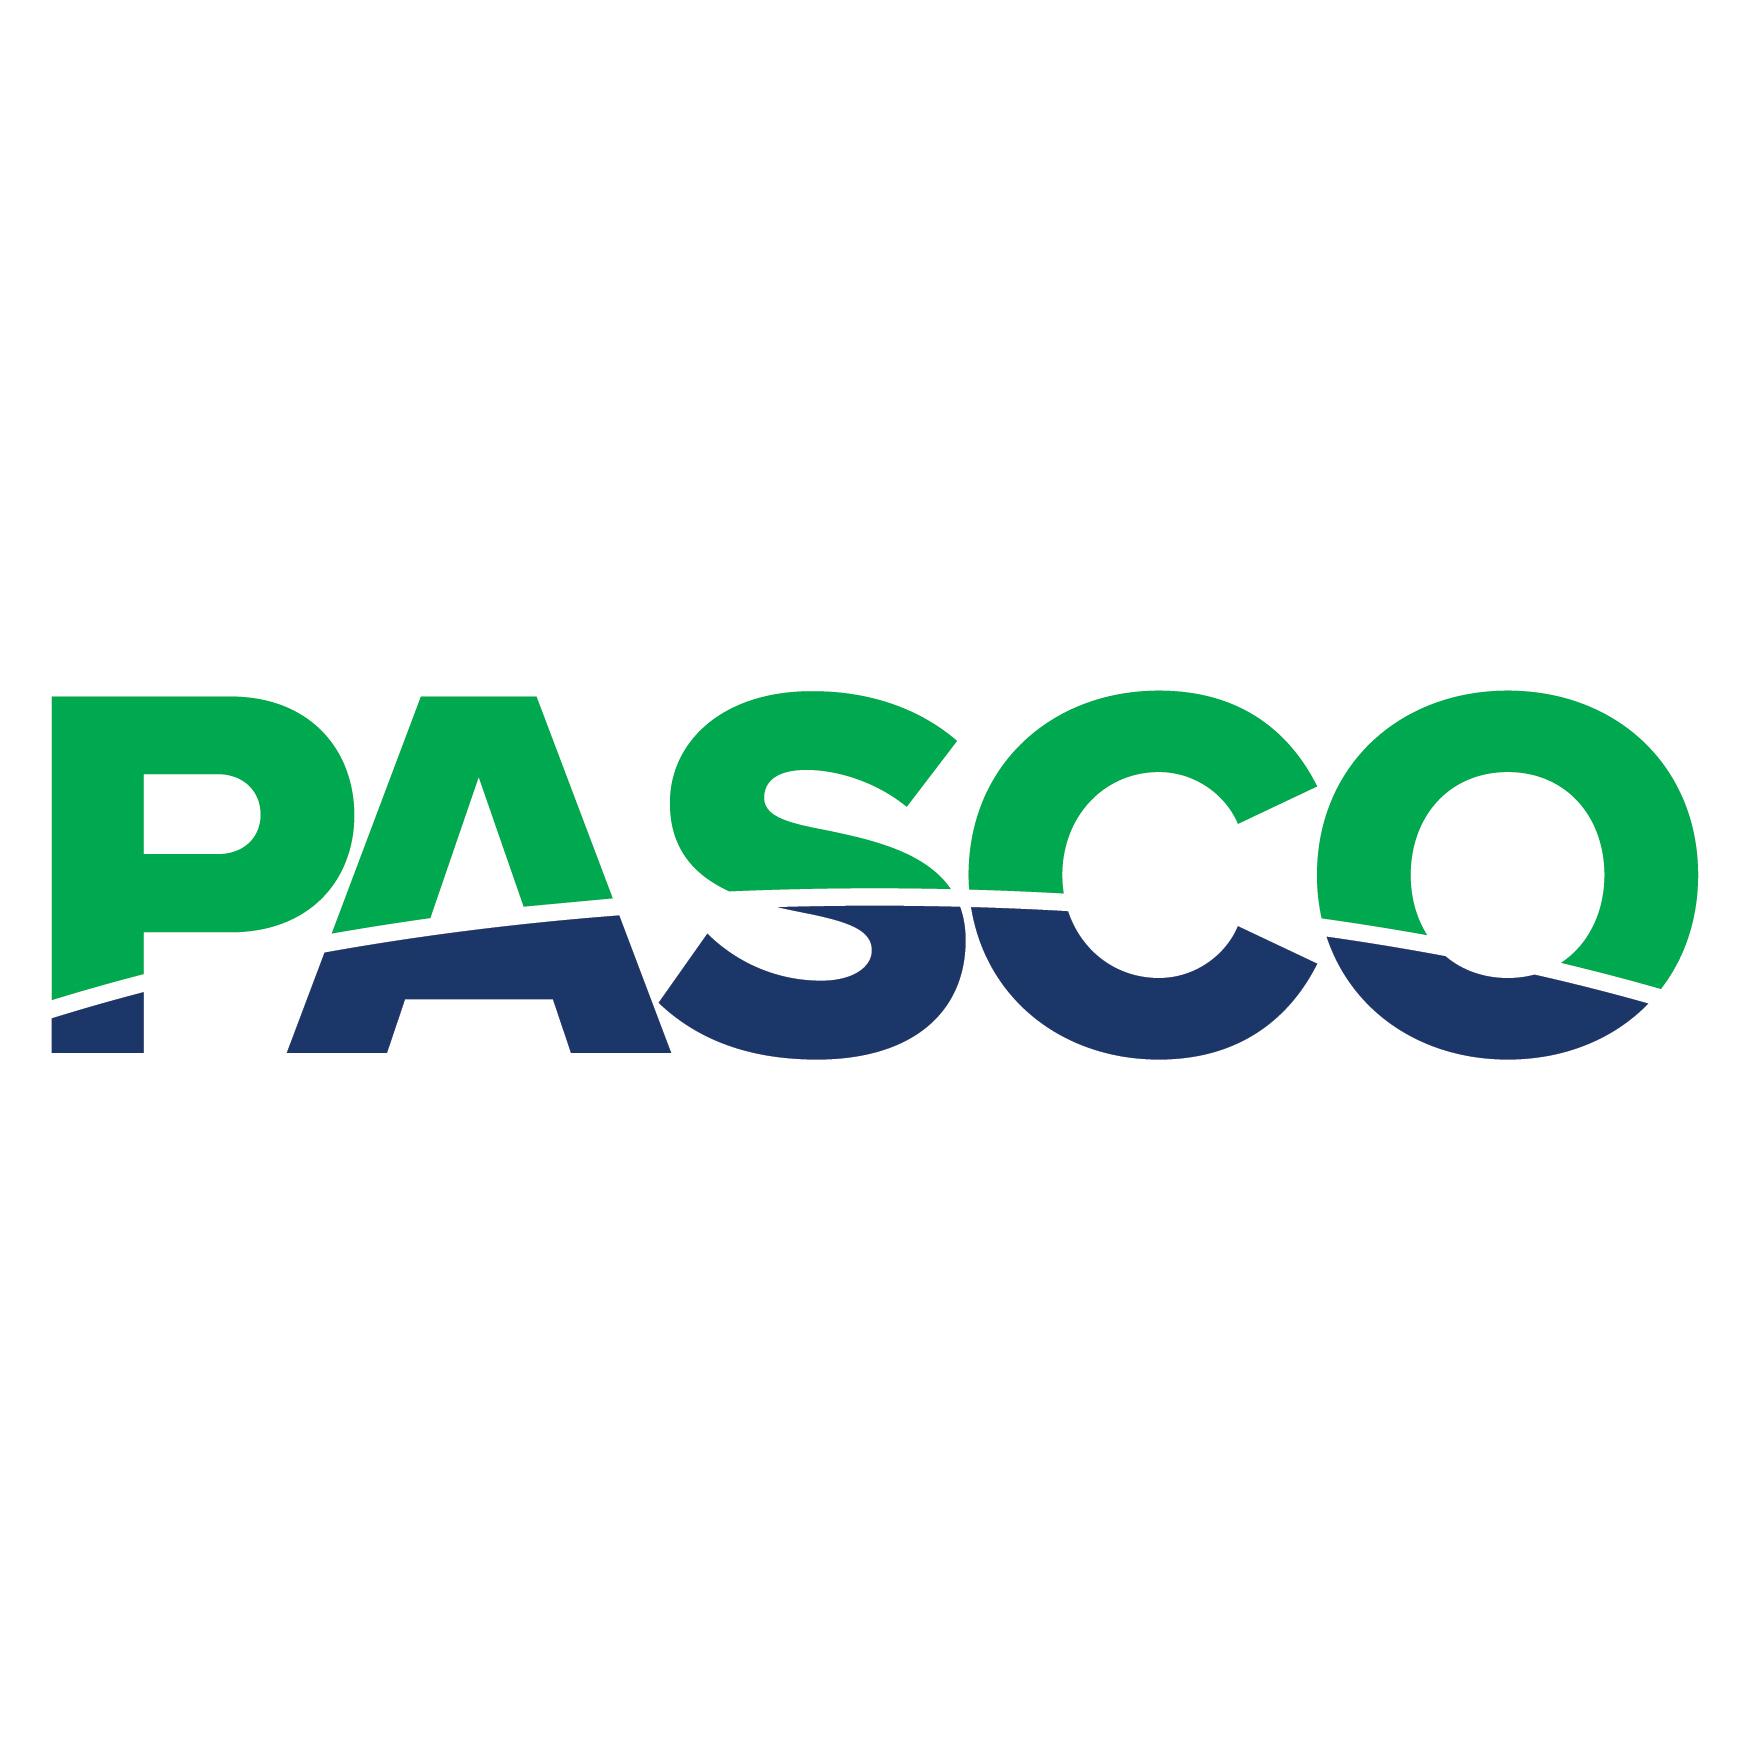 Pasco Logo - Home Health Care Services. PASCO. Personal Assistance Services